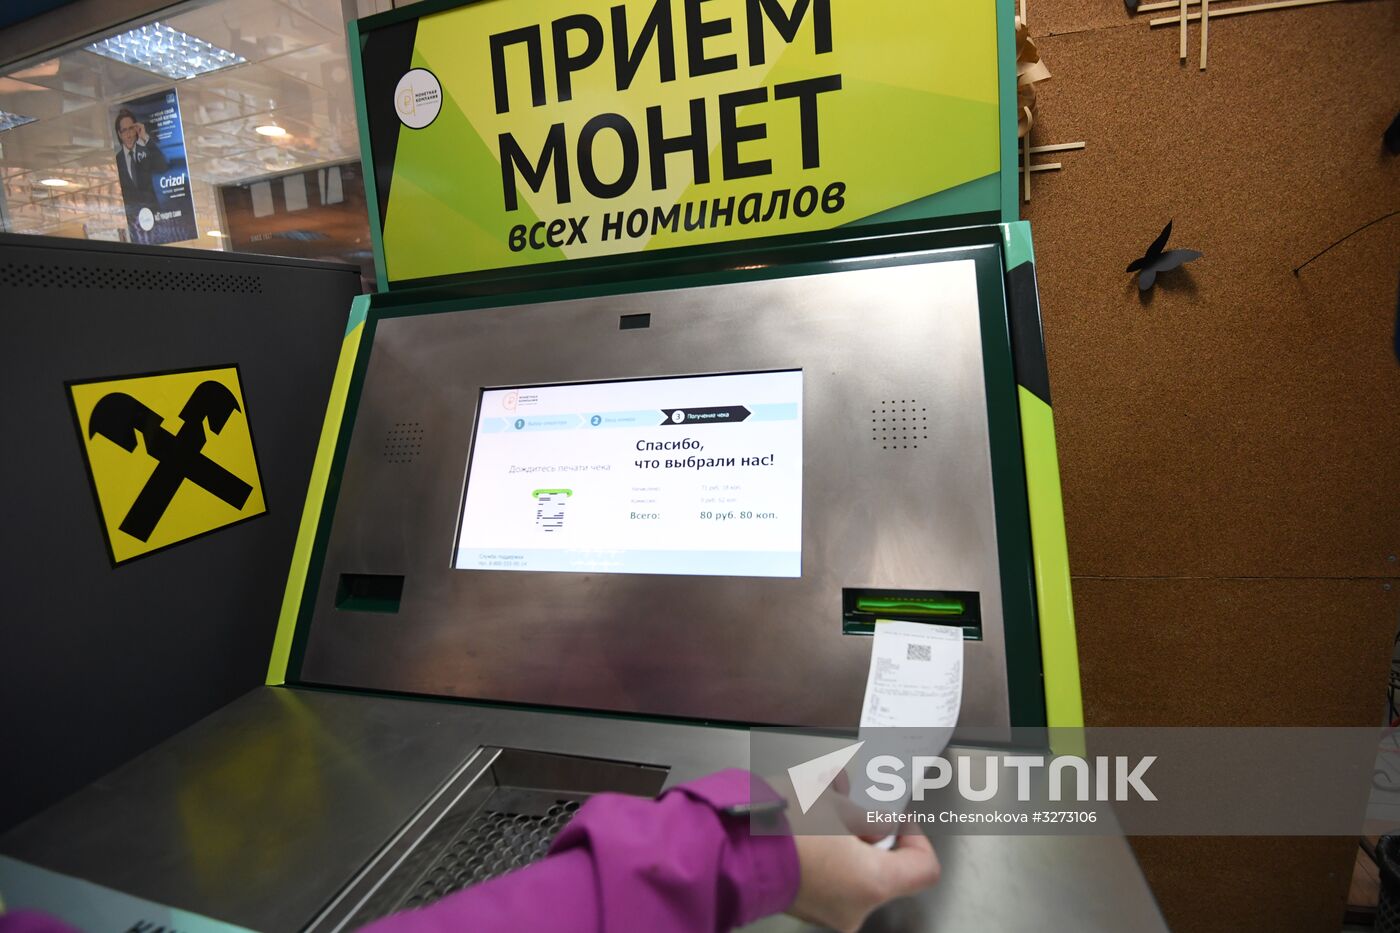 Coin accepting terminals appear in Moscow